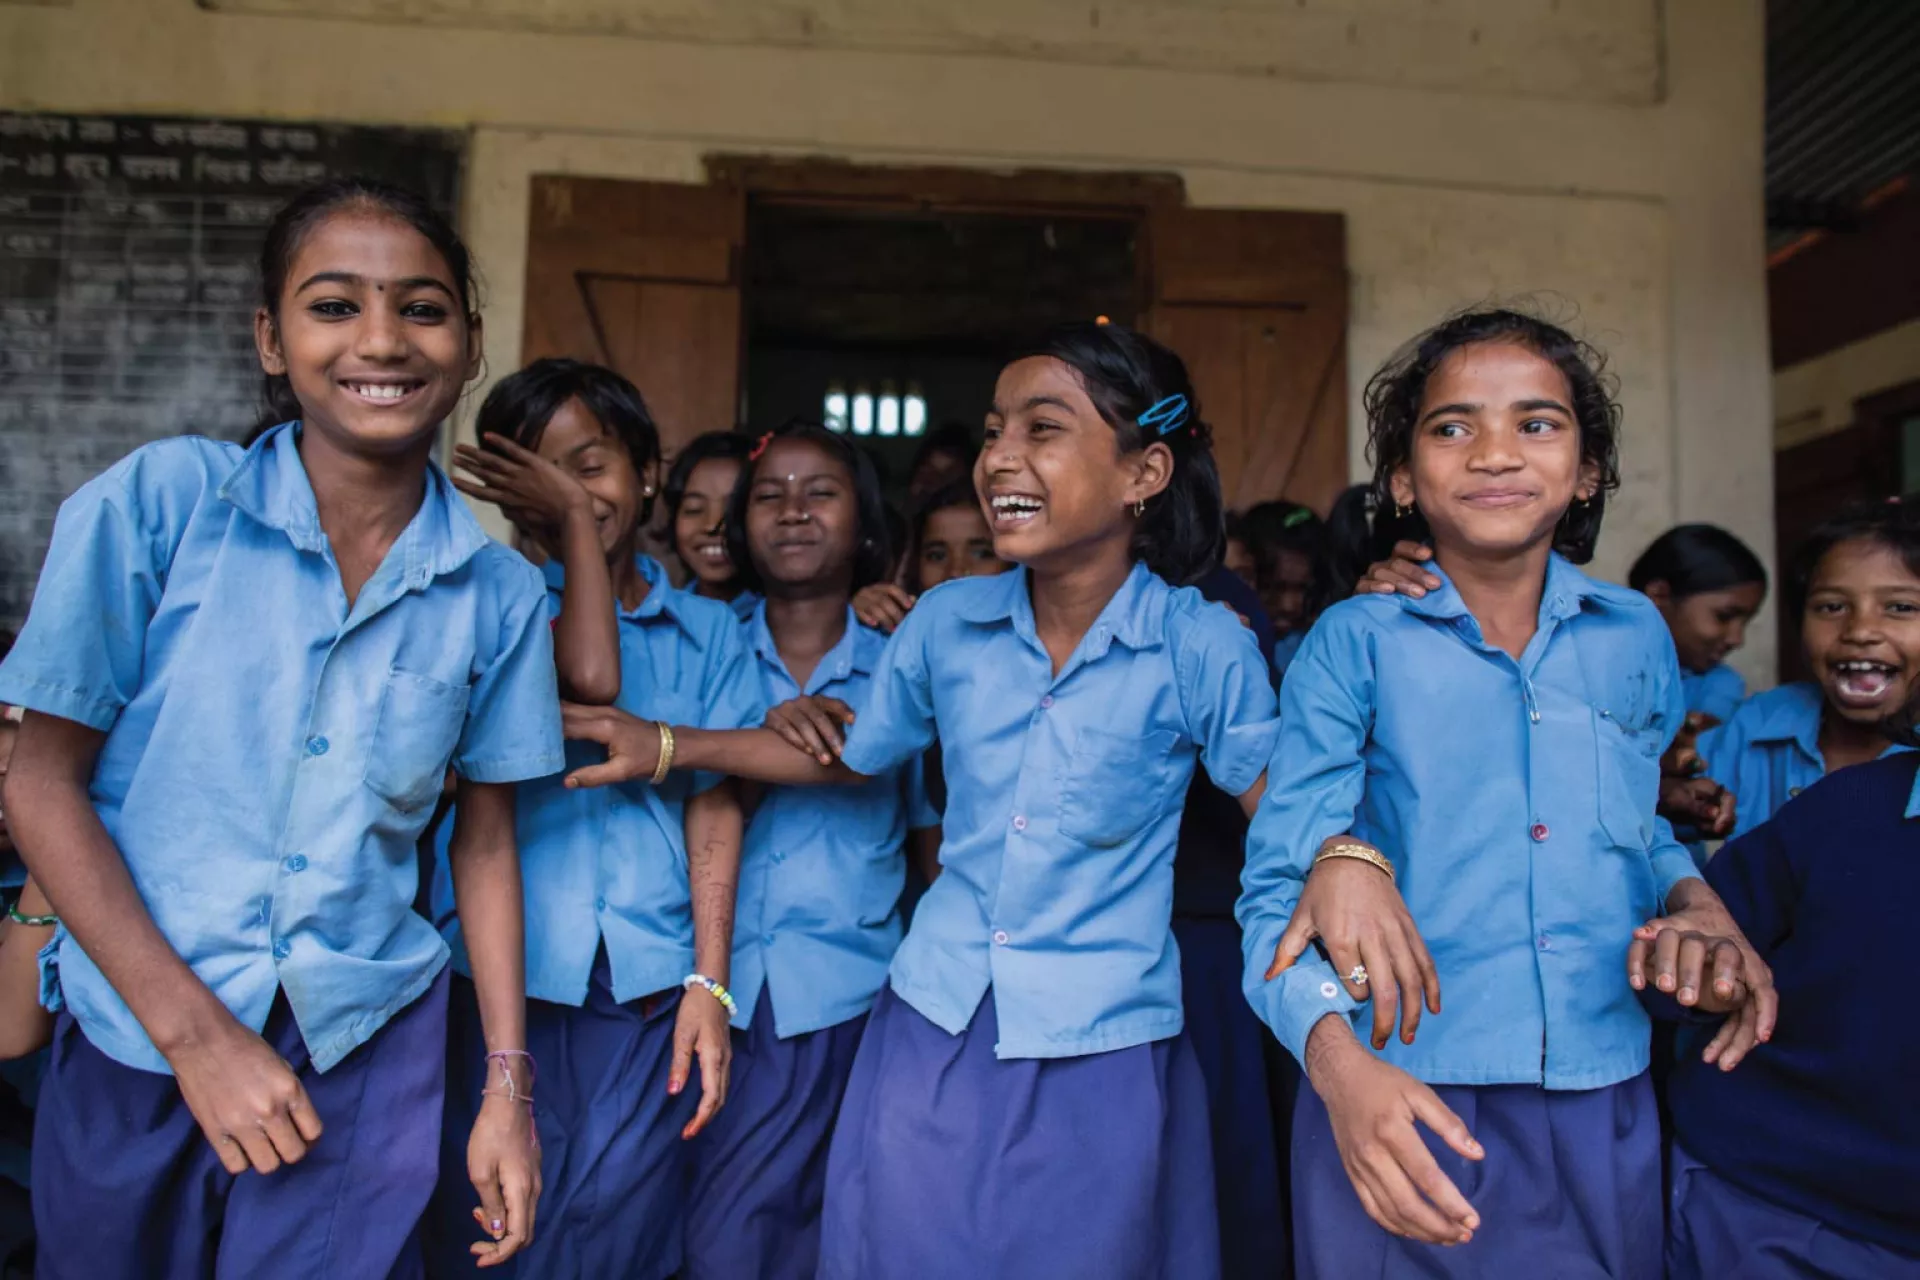 A group of students in a school in India smiling together